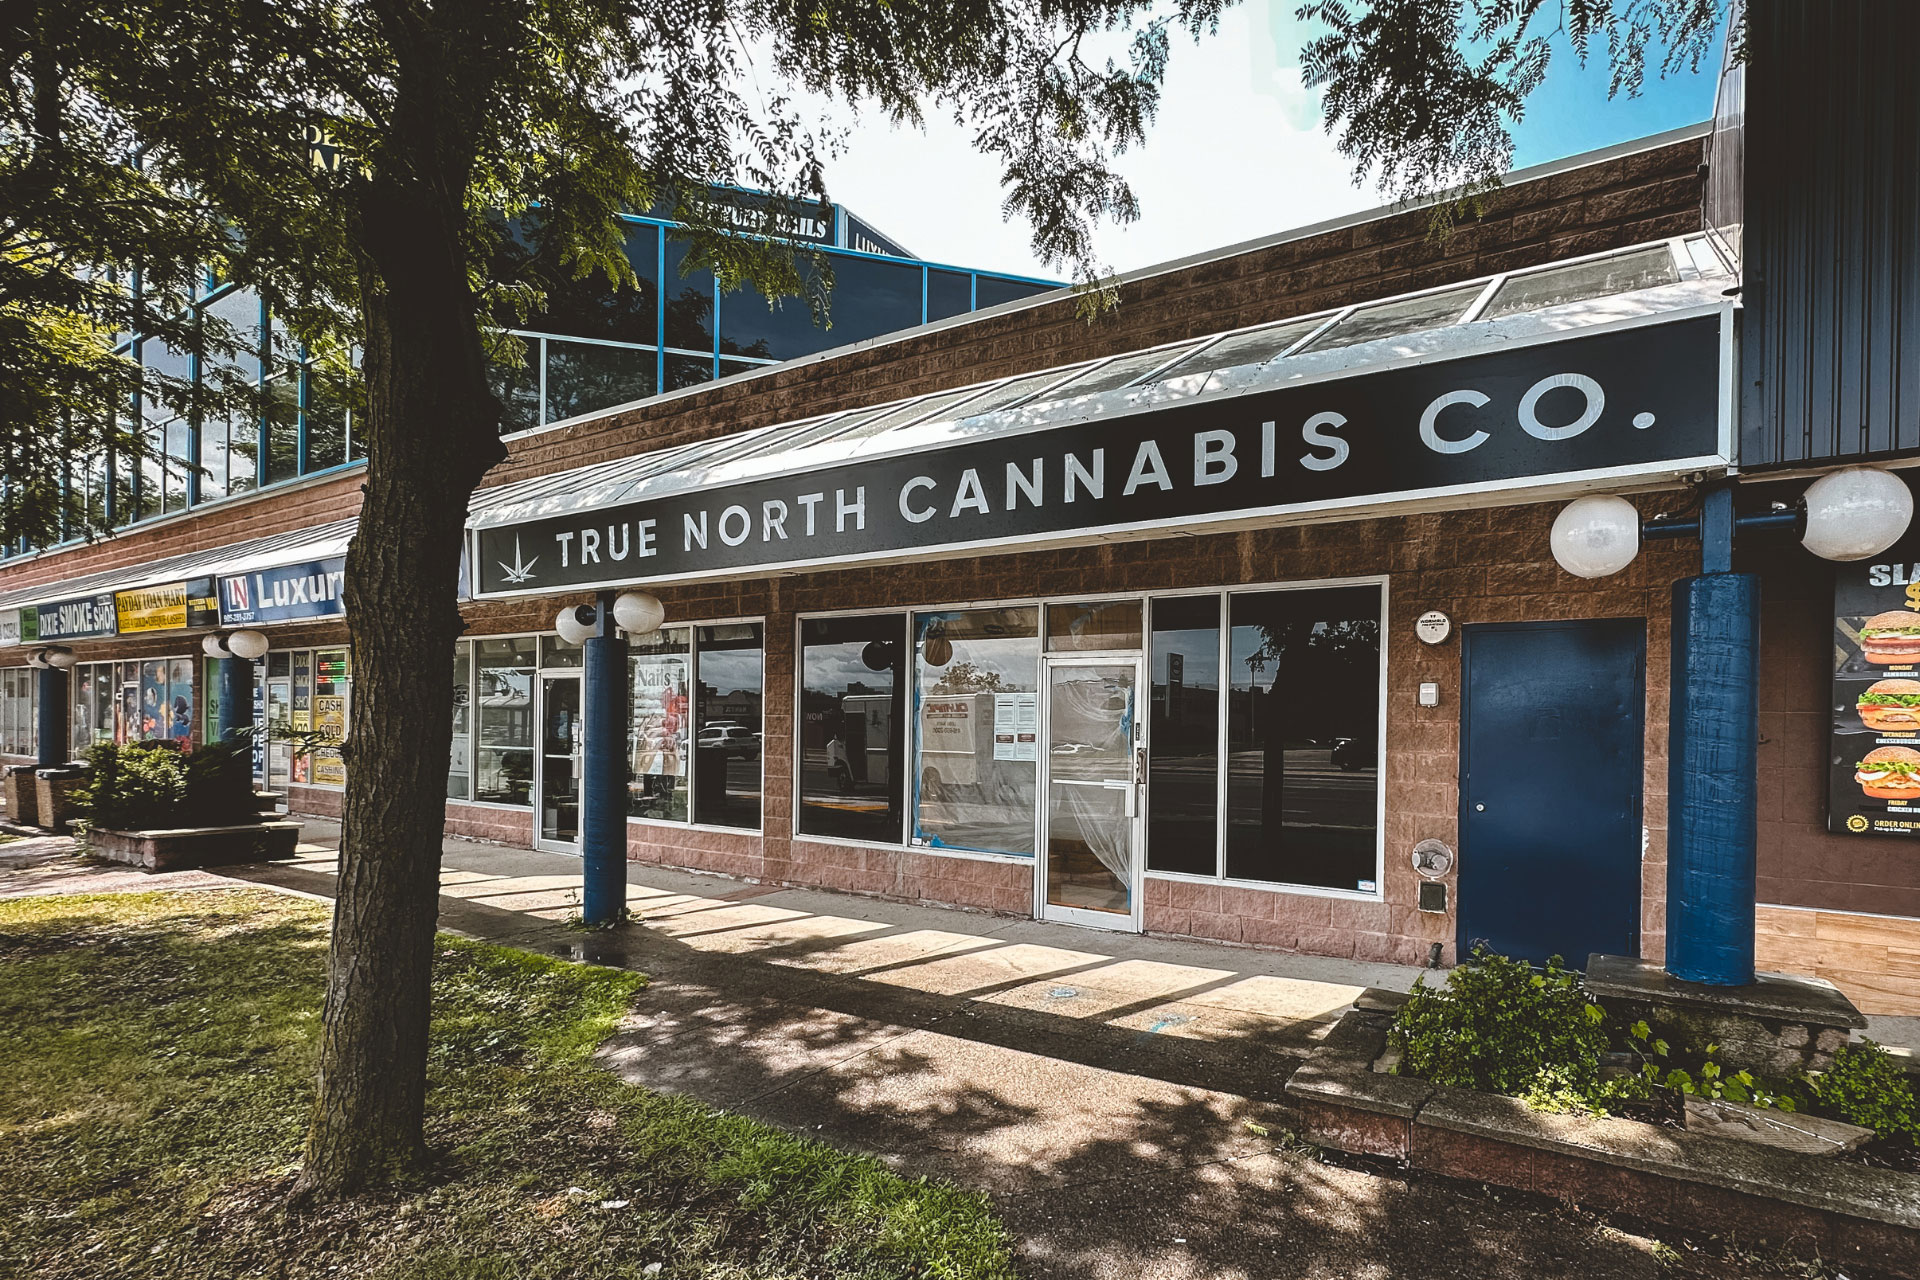 True North Cannabis Co.’ Mississauga dispensary storefront